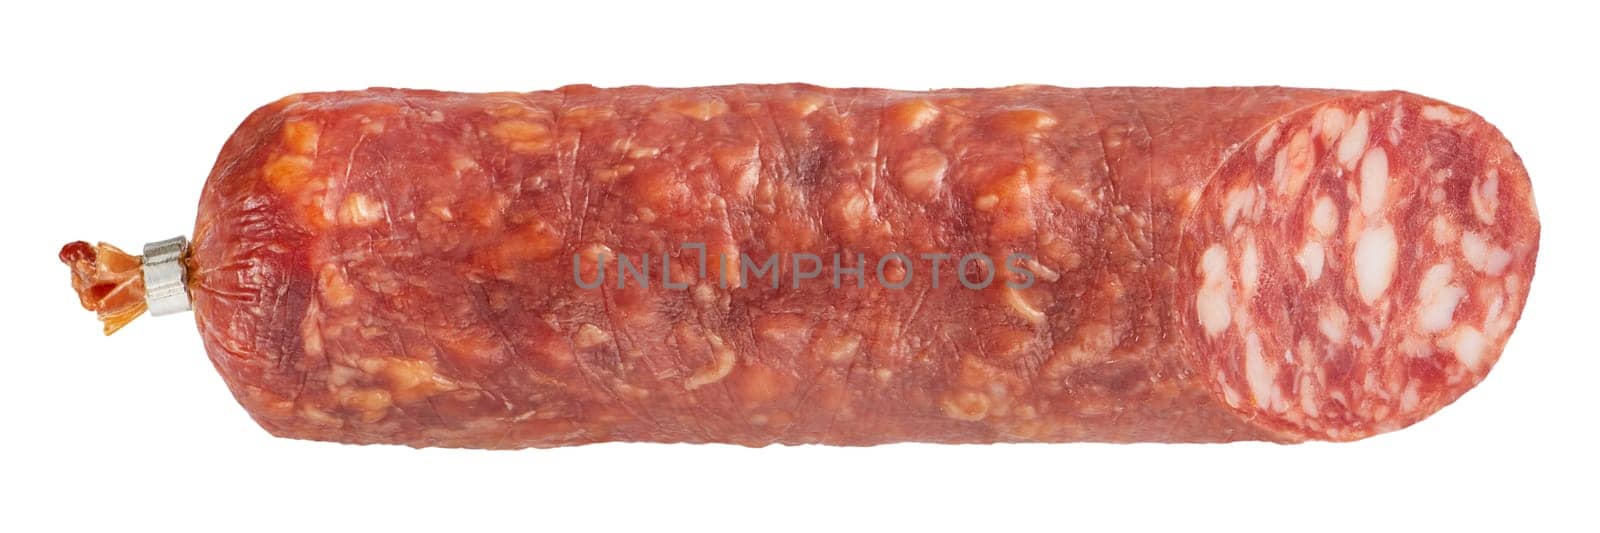 Dried sausage roll on a white isolated background. The sausage roll is suitable for inserting into a design or project. by SERSOL